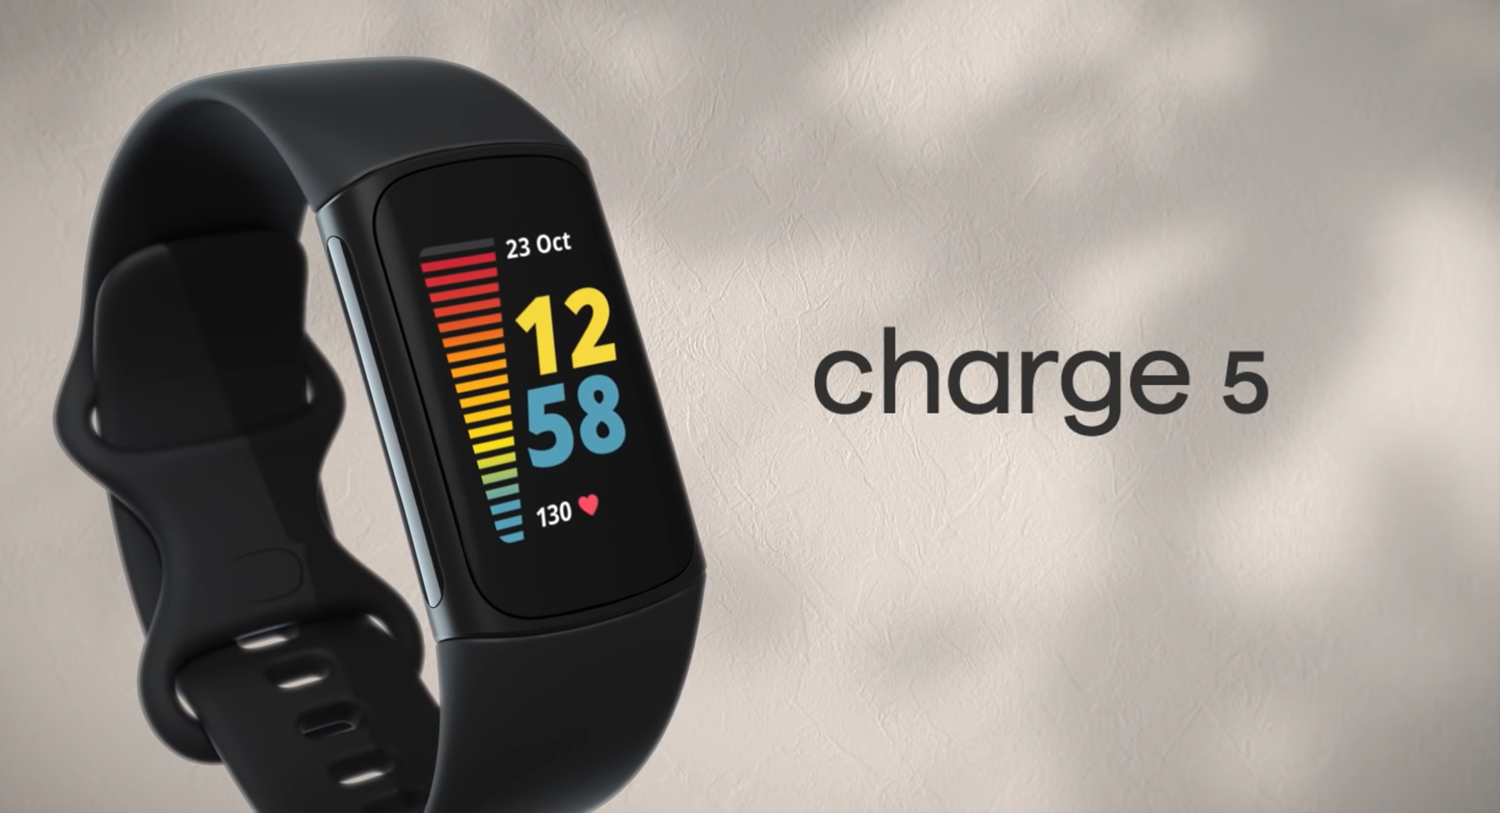 Fitbit Charge 6 announced and available to preorder